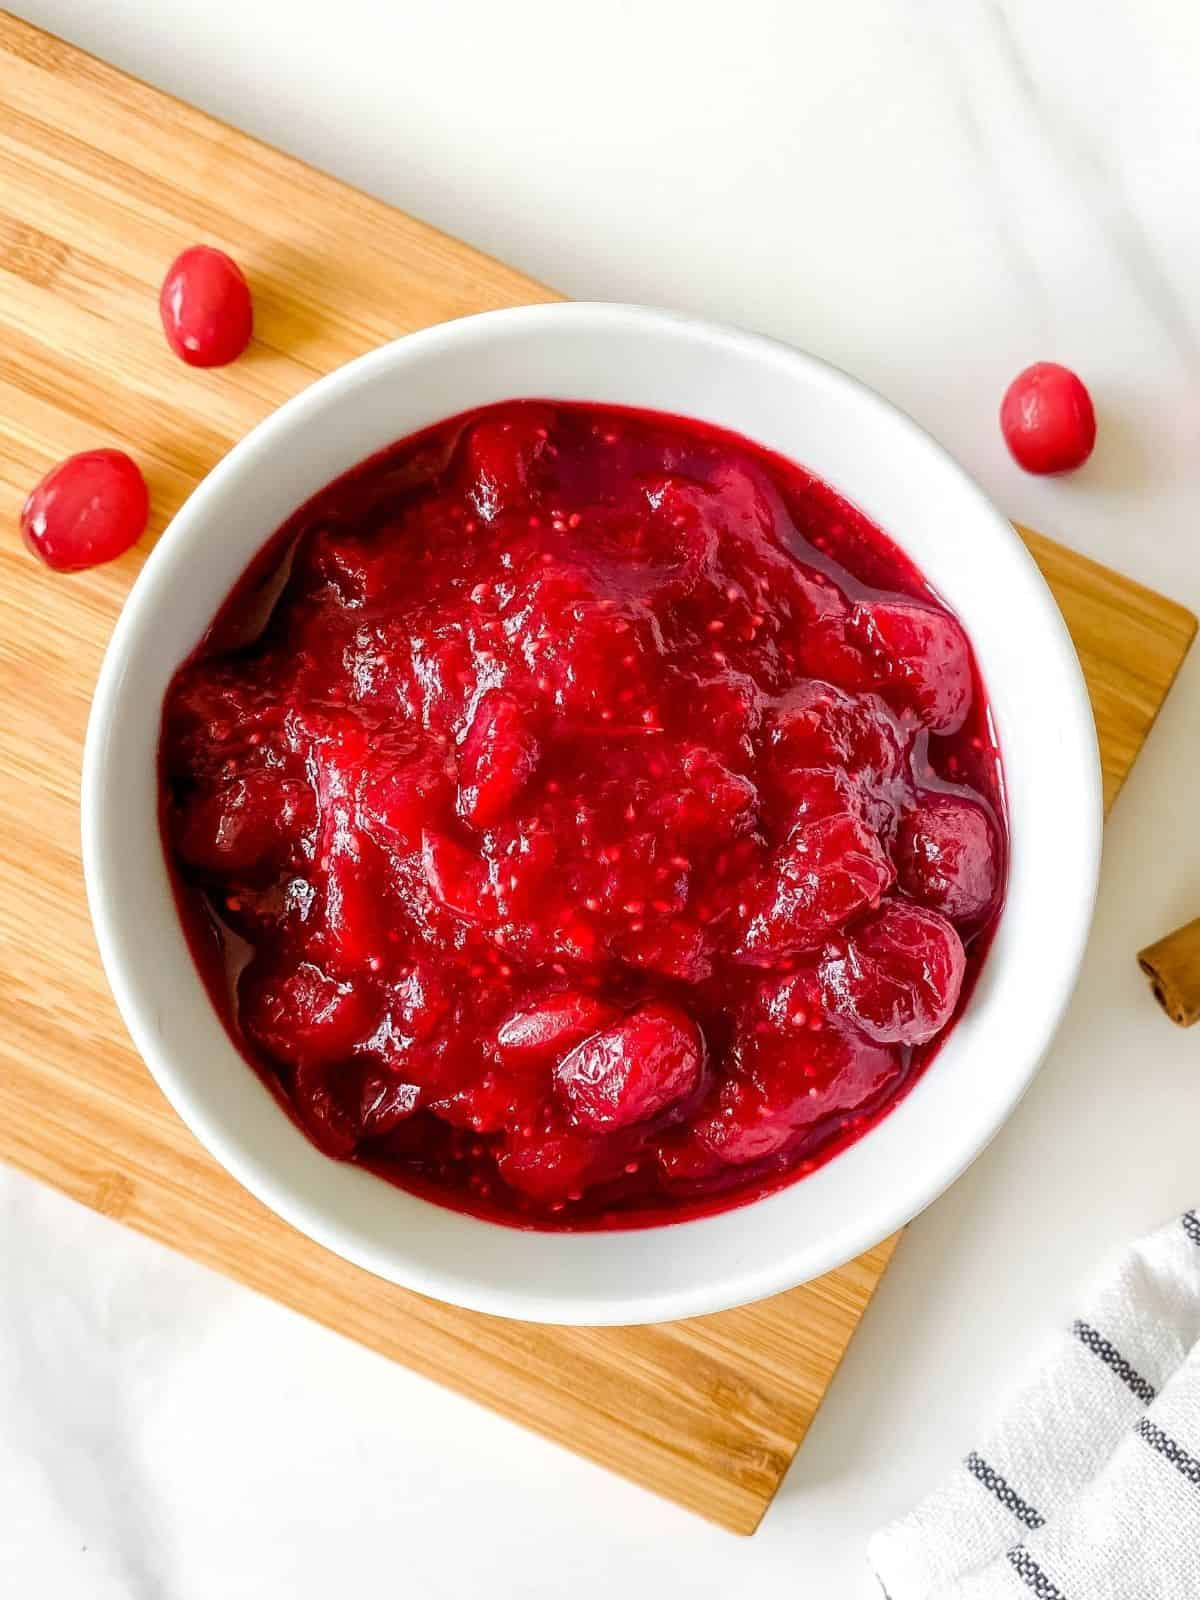 citrus free cranberry sauce in a white bowl on a wooden board.